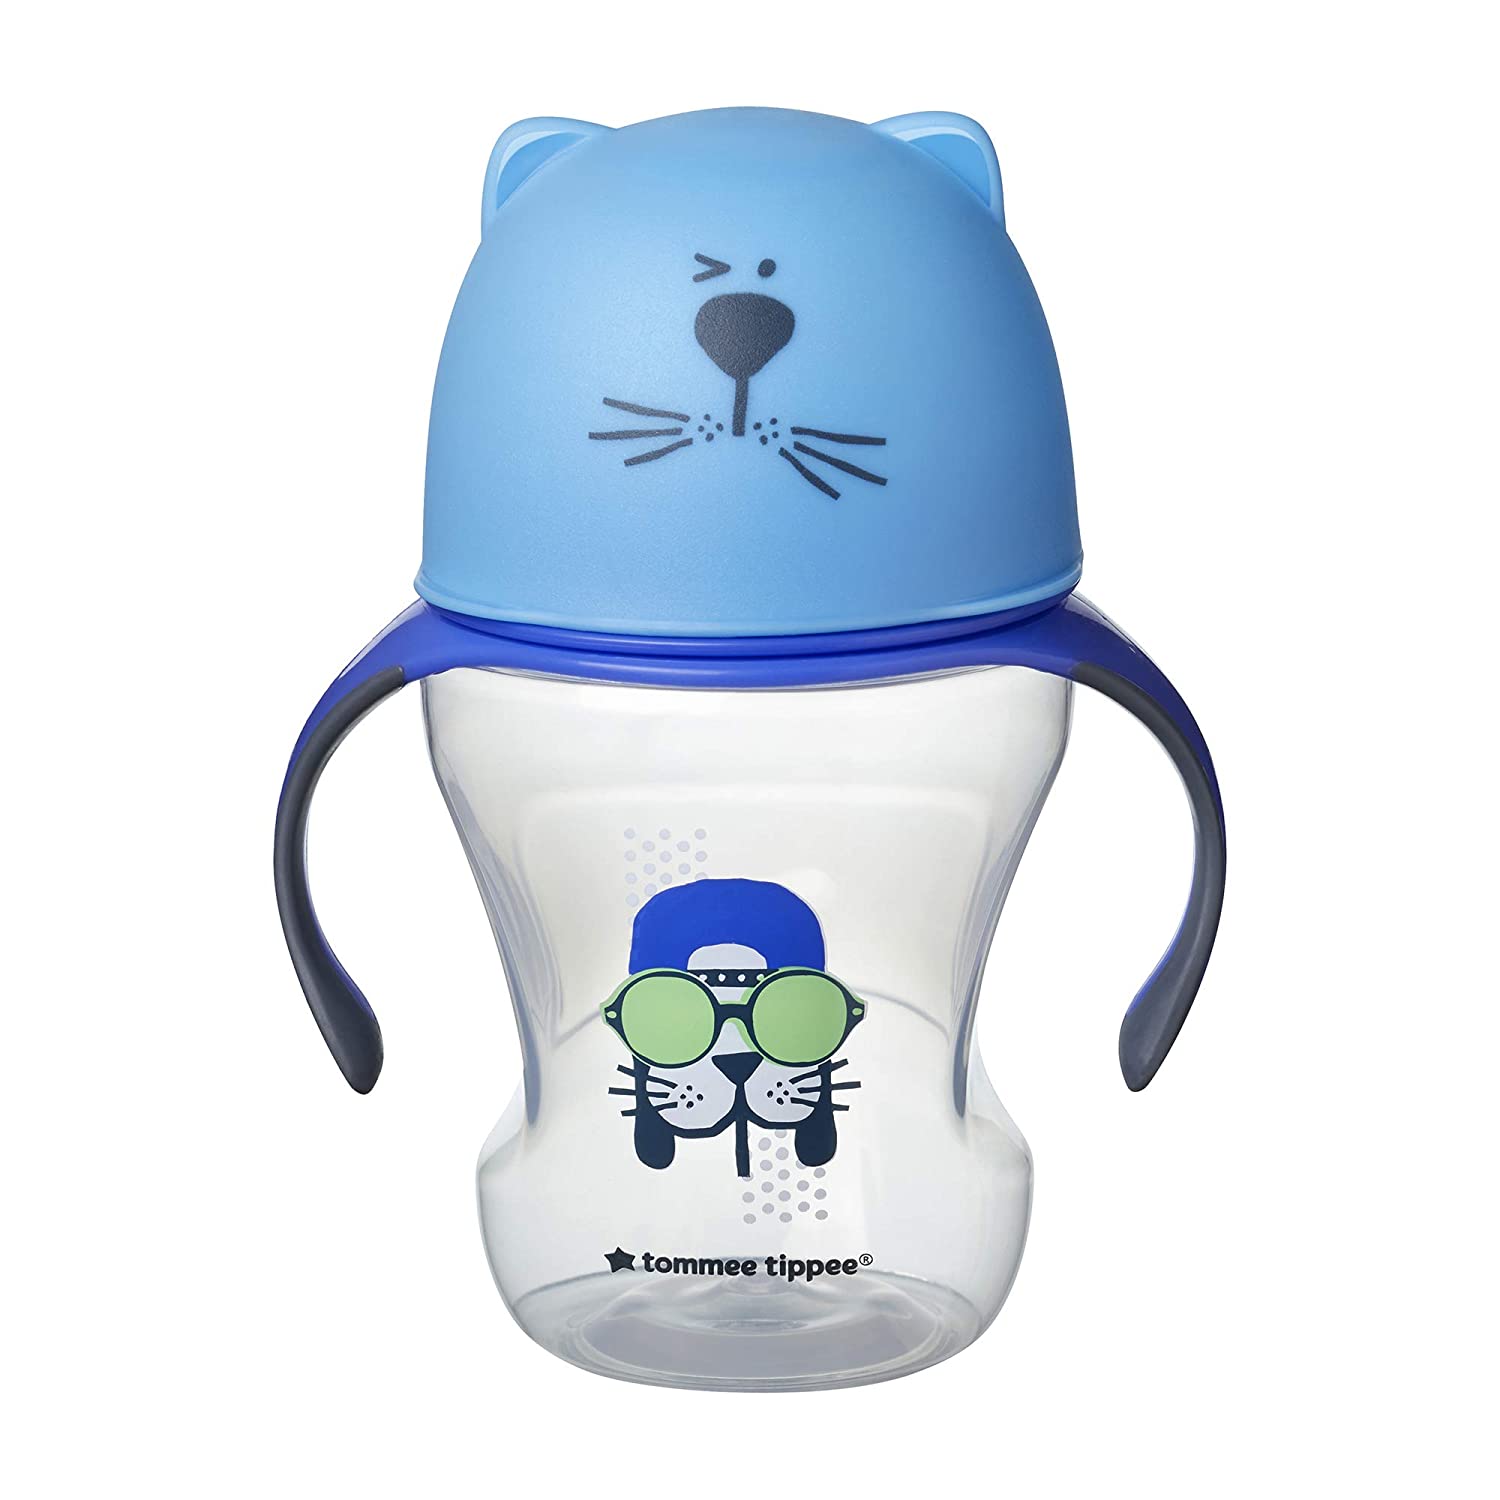 Tommee Tippee Sippee Freeflow Cup 230 ml Blue